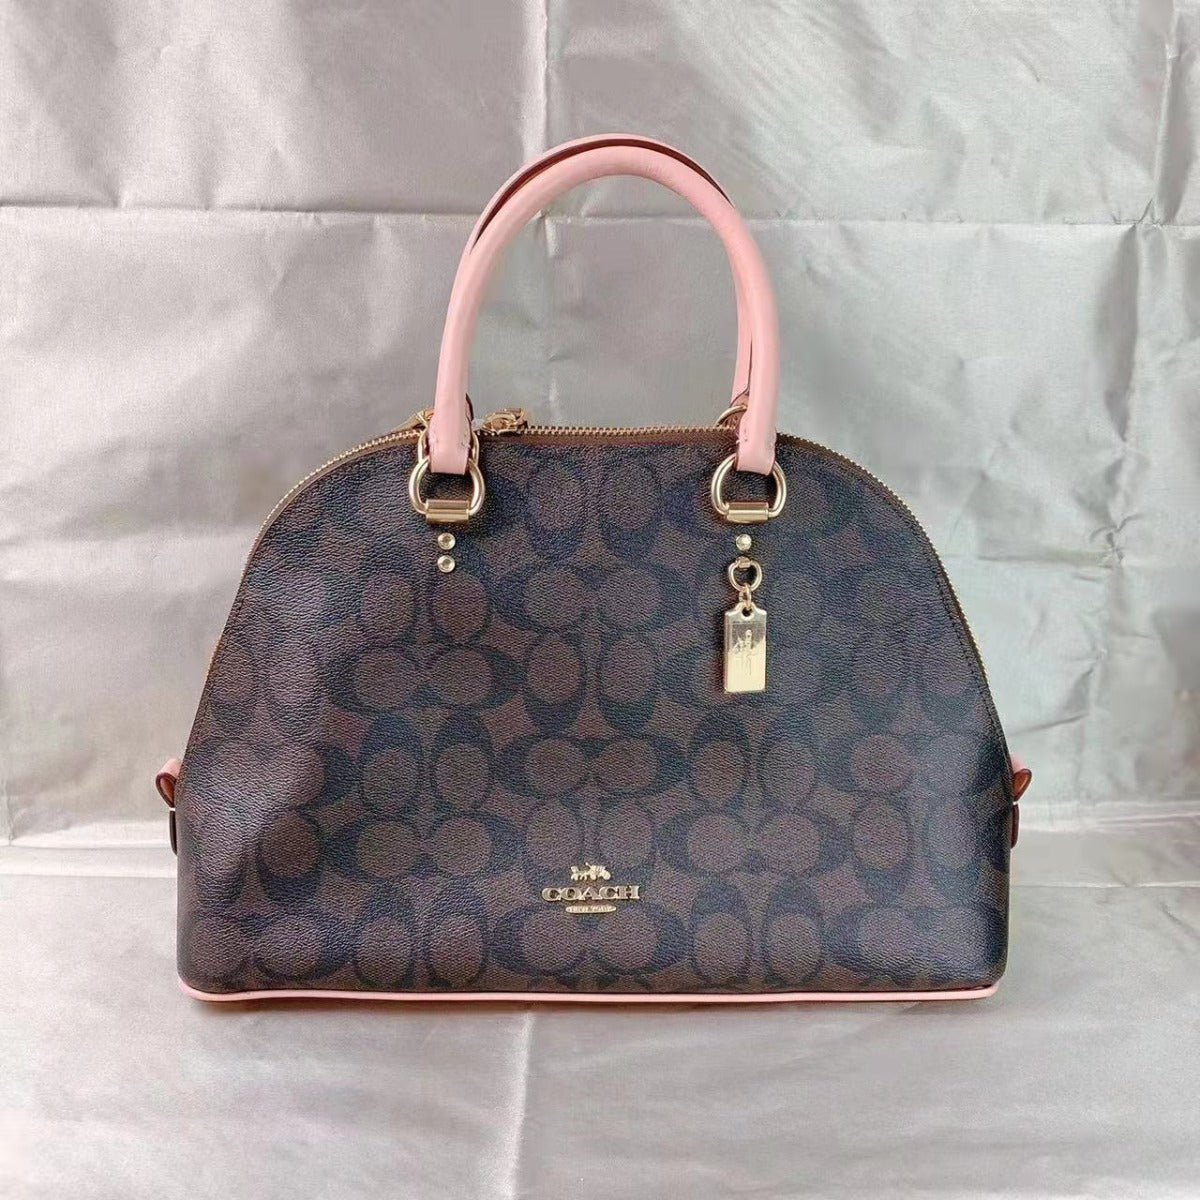 COACH 2558 KATY SATCHEL IN SIGNATURE CANVAS GOLD/BROWN SHELL PINK